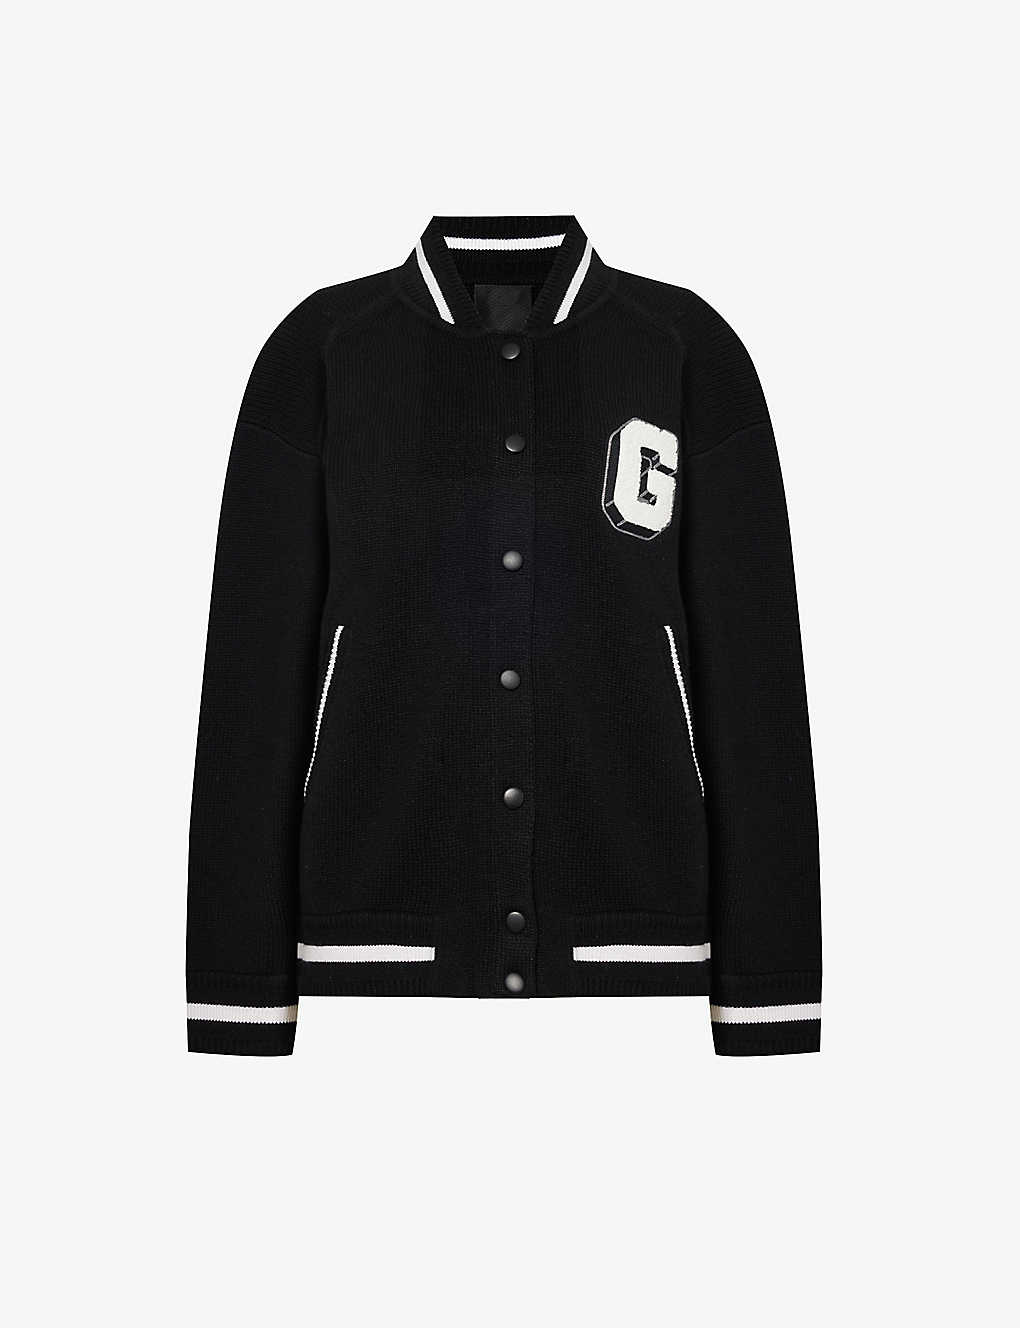 Givenchy Womens Black Branded-flocking Cashmere Knitted Jacket